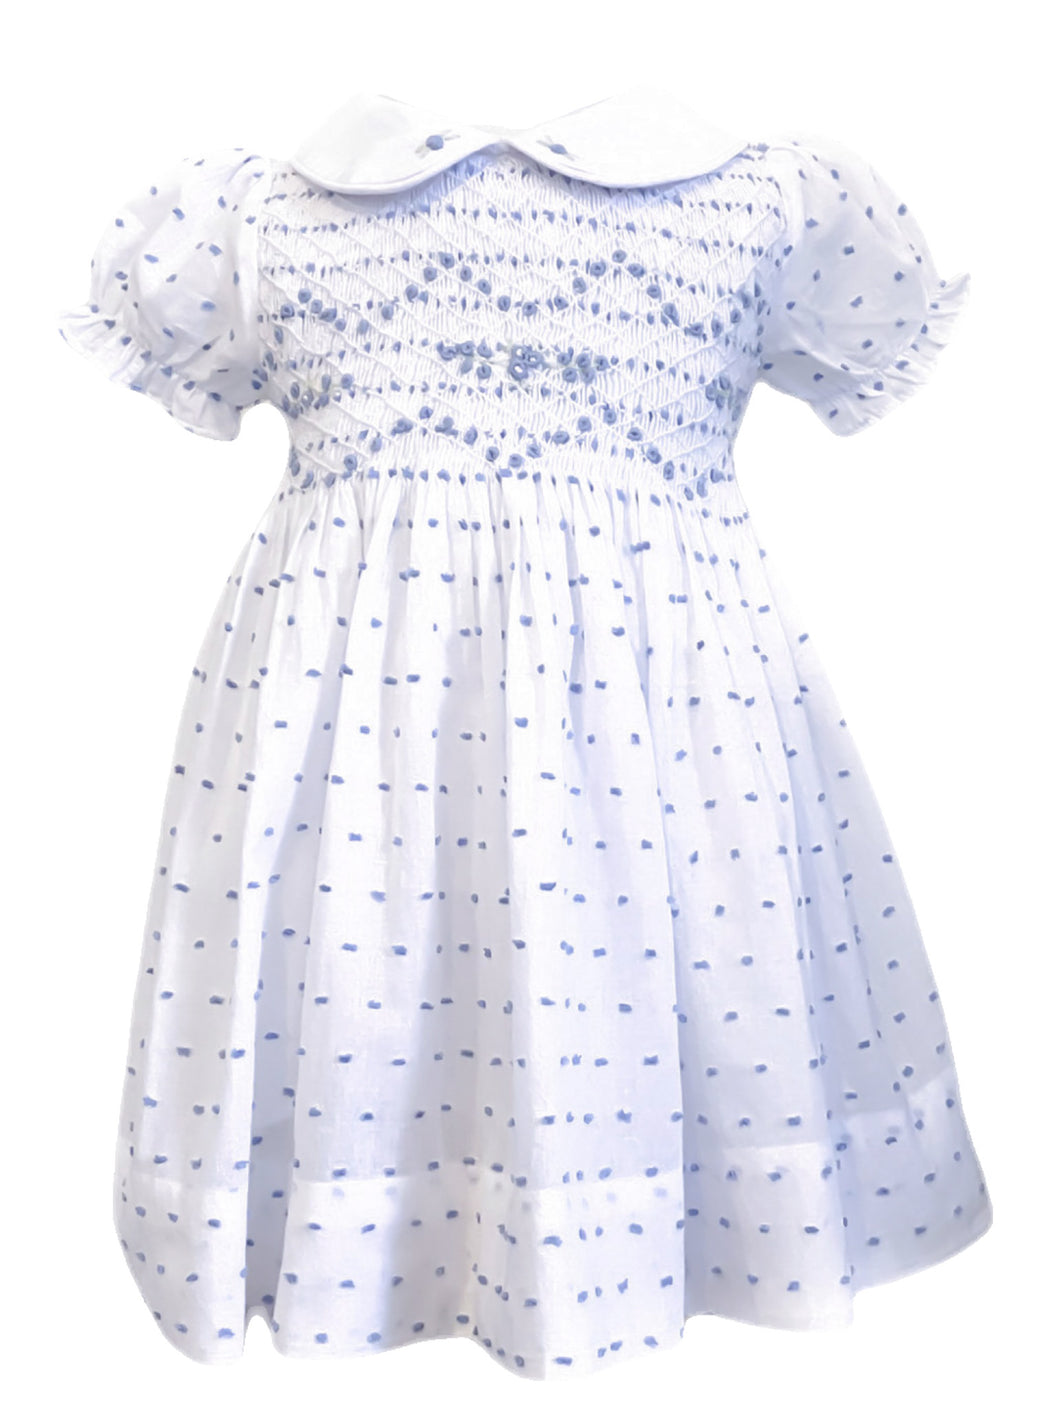 The Smocked Dress - Traditional Blue Swiss Dot